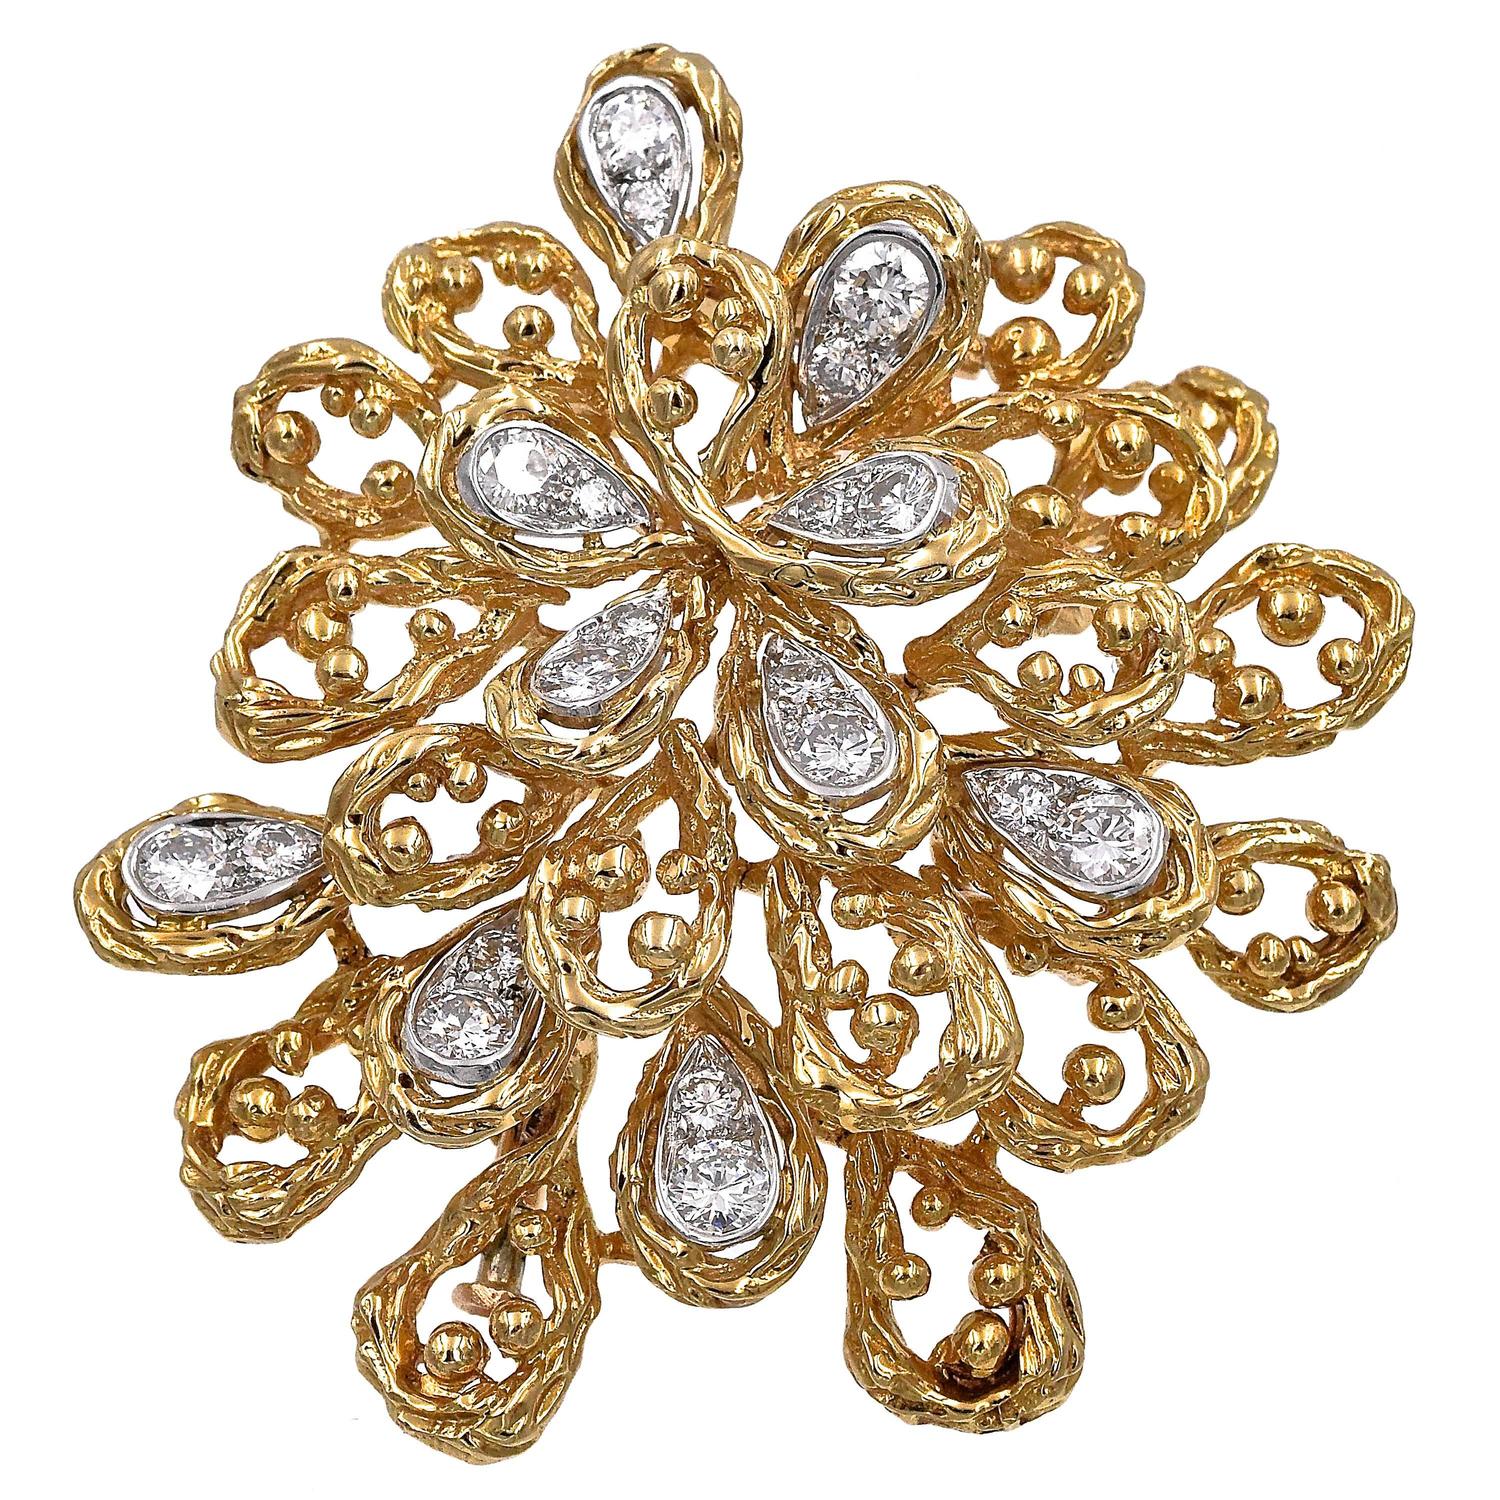 1960s Van Cleef and Arpels Diamond Gold Brooch For Sale at 1stdibs